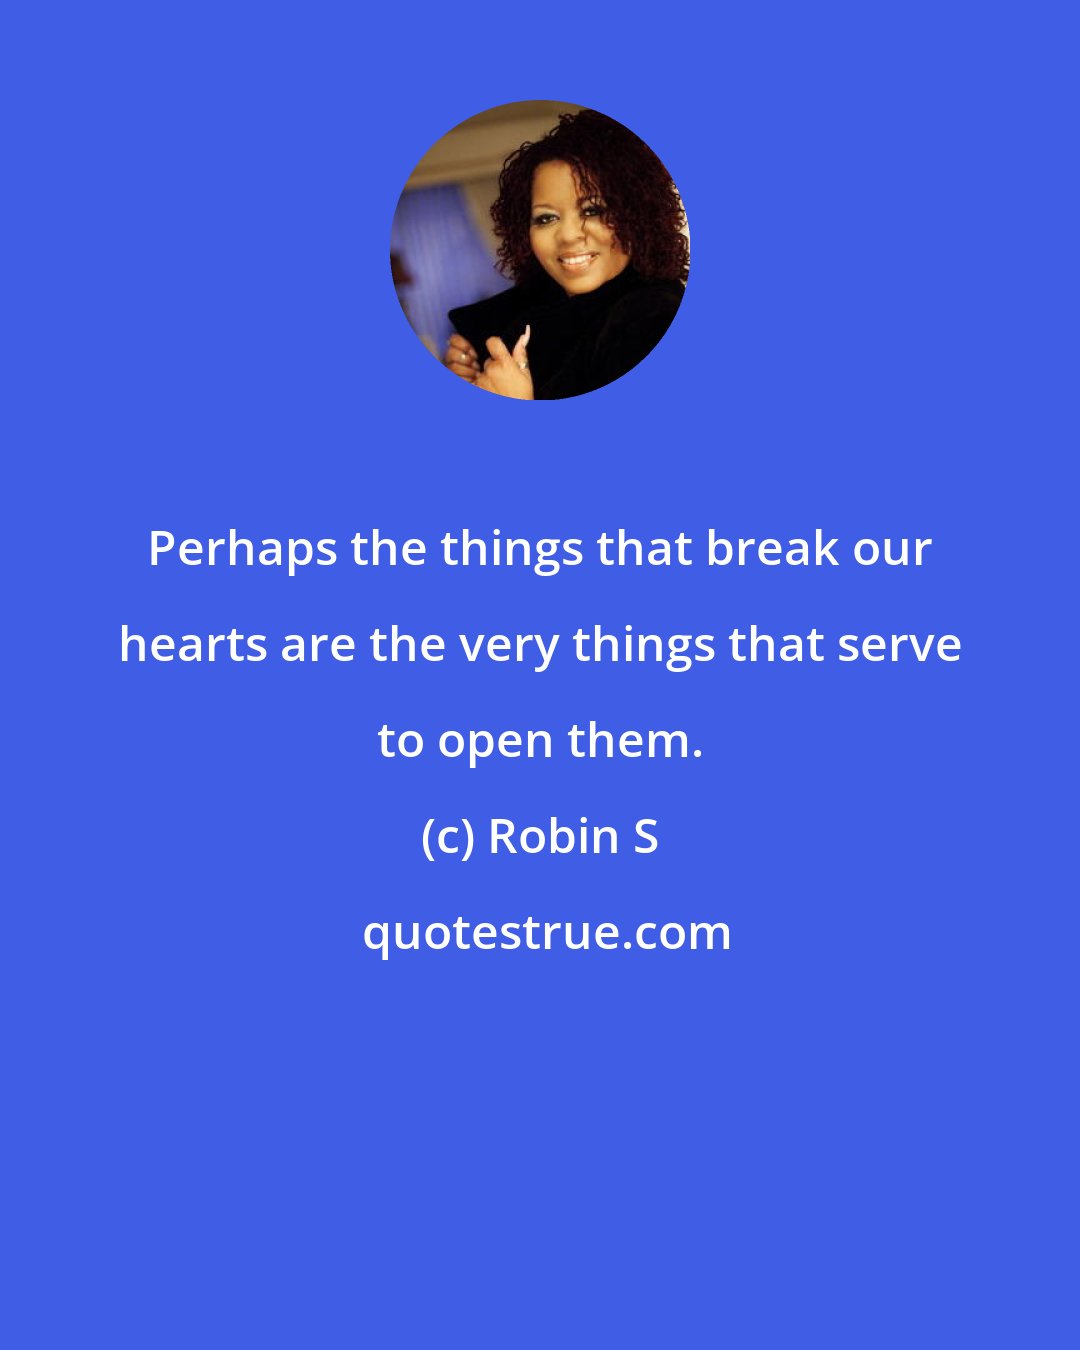 Robin S: Perhaps the things that break our hearts are the very things that serve to open them.